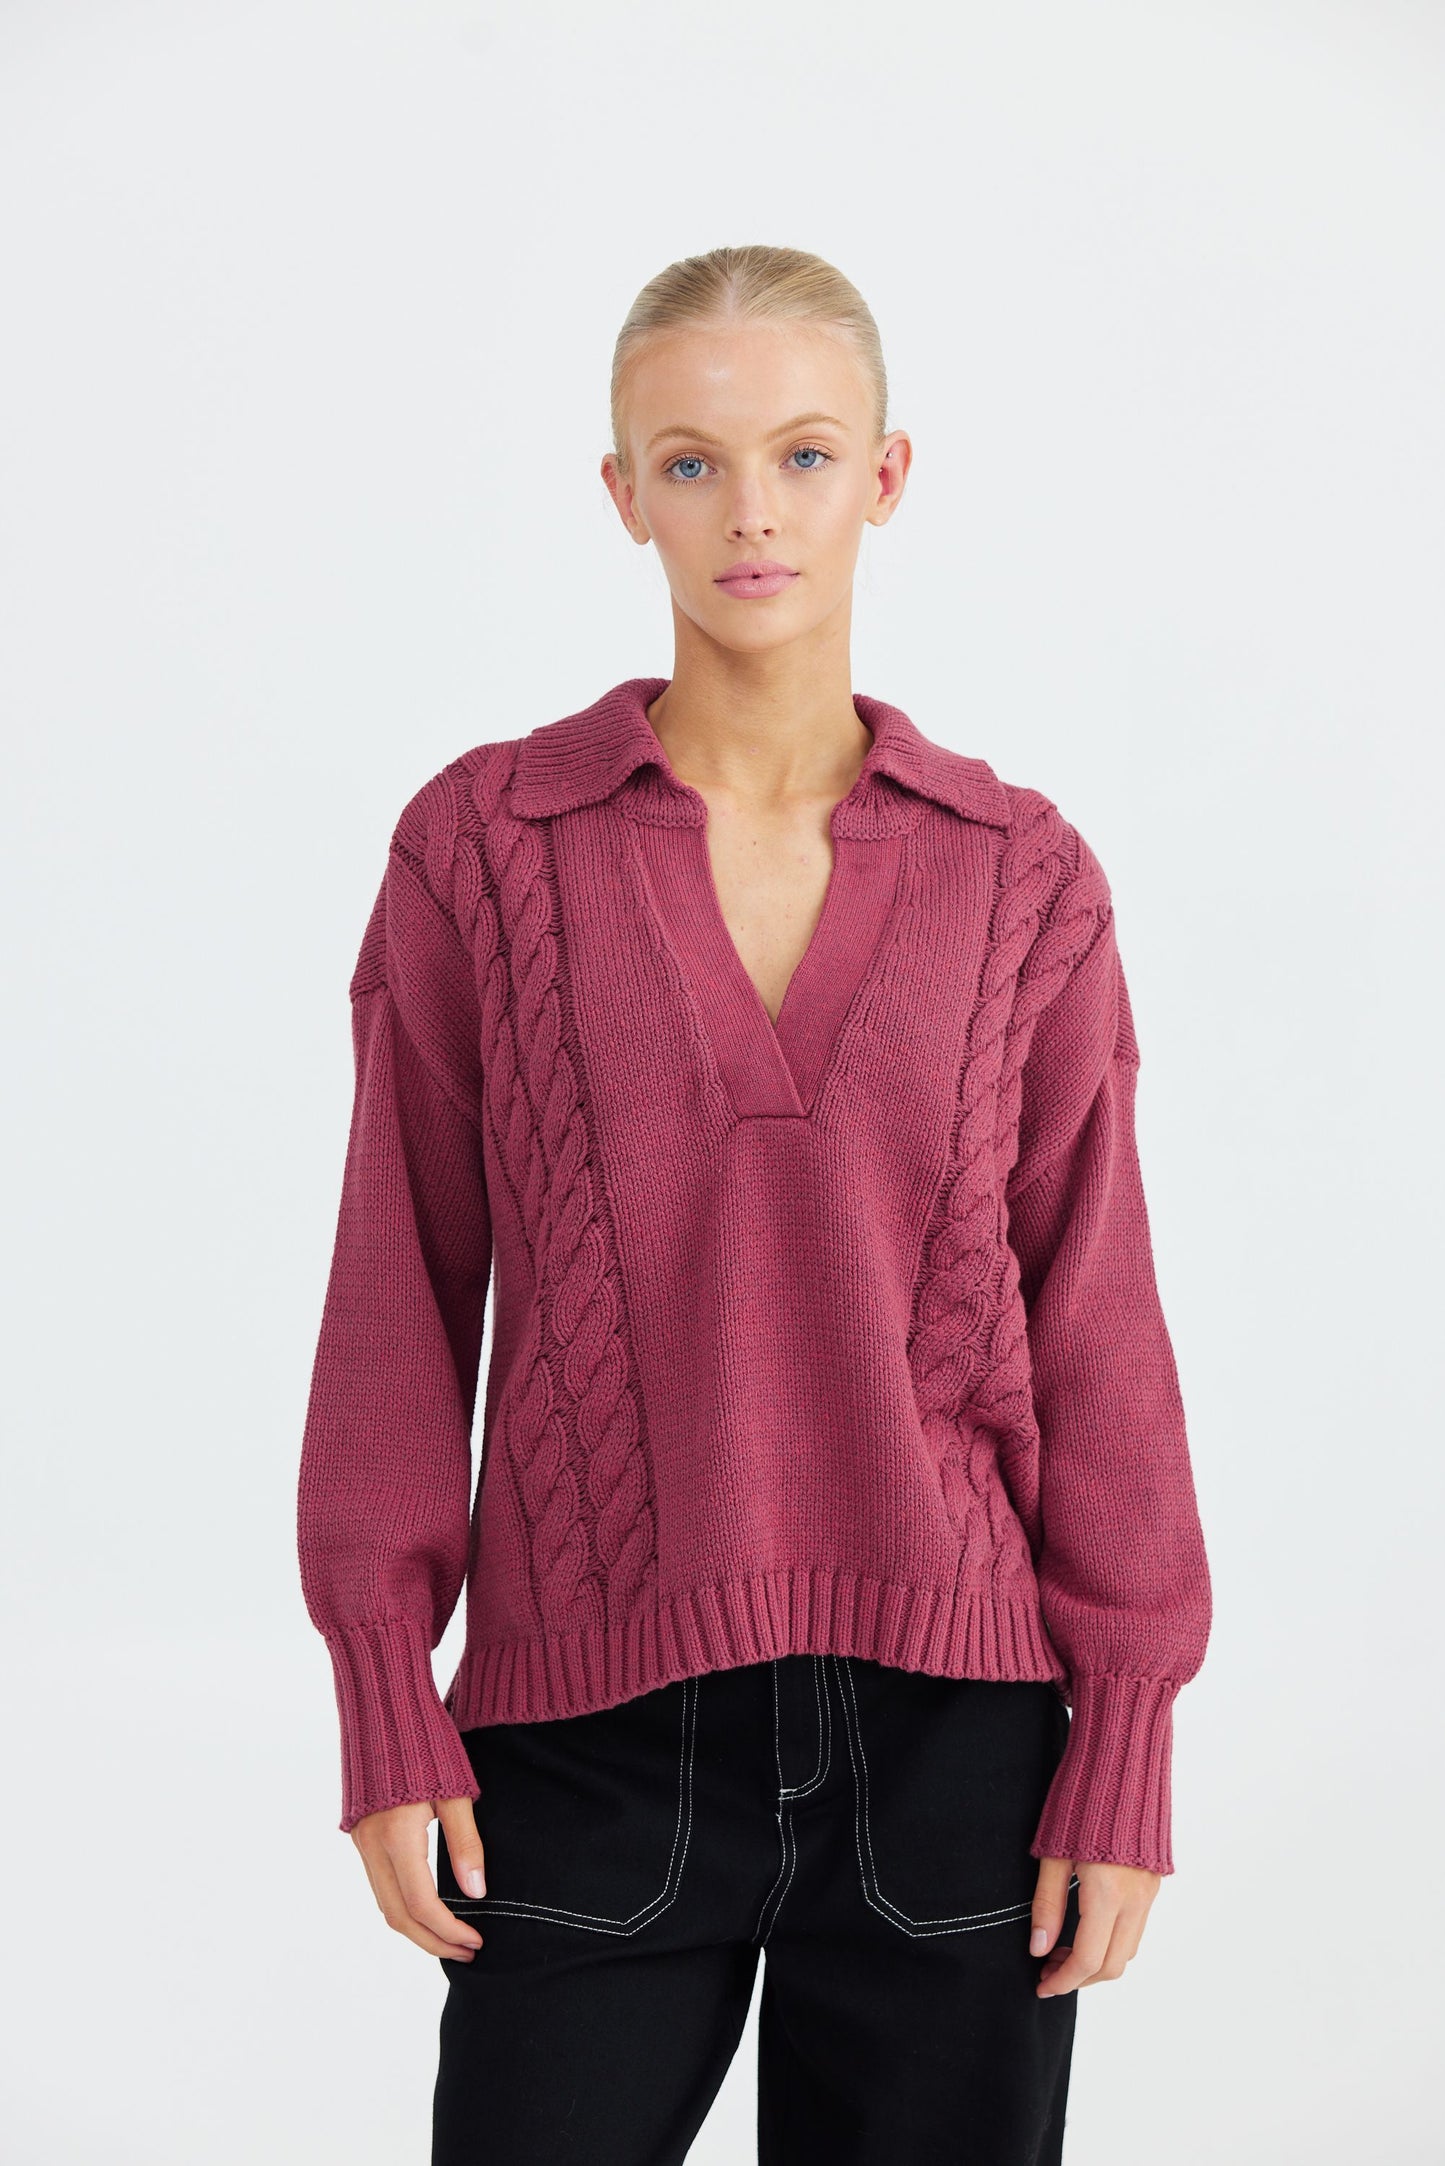 Daisy Says Goldie Sweater - Mulberry